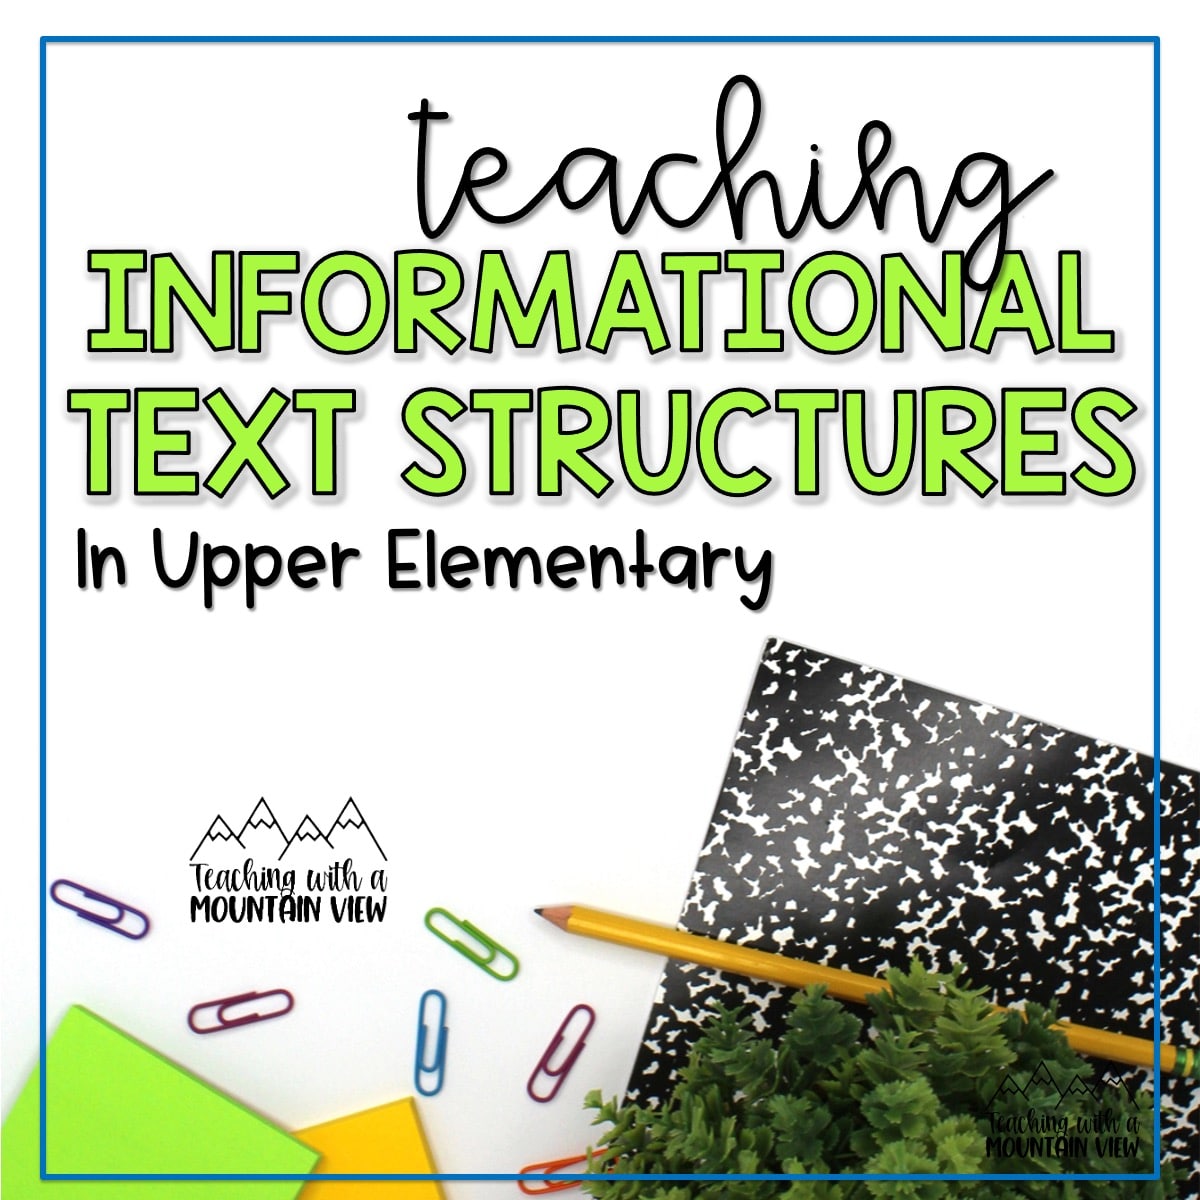 Upper elementary ideas for teaching informational text structures with anchor chart, interactive notebooks, task cards, assessments and more.